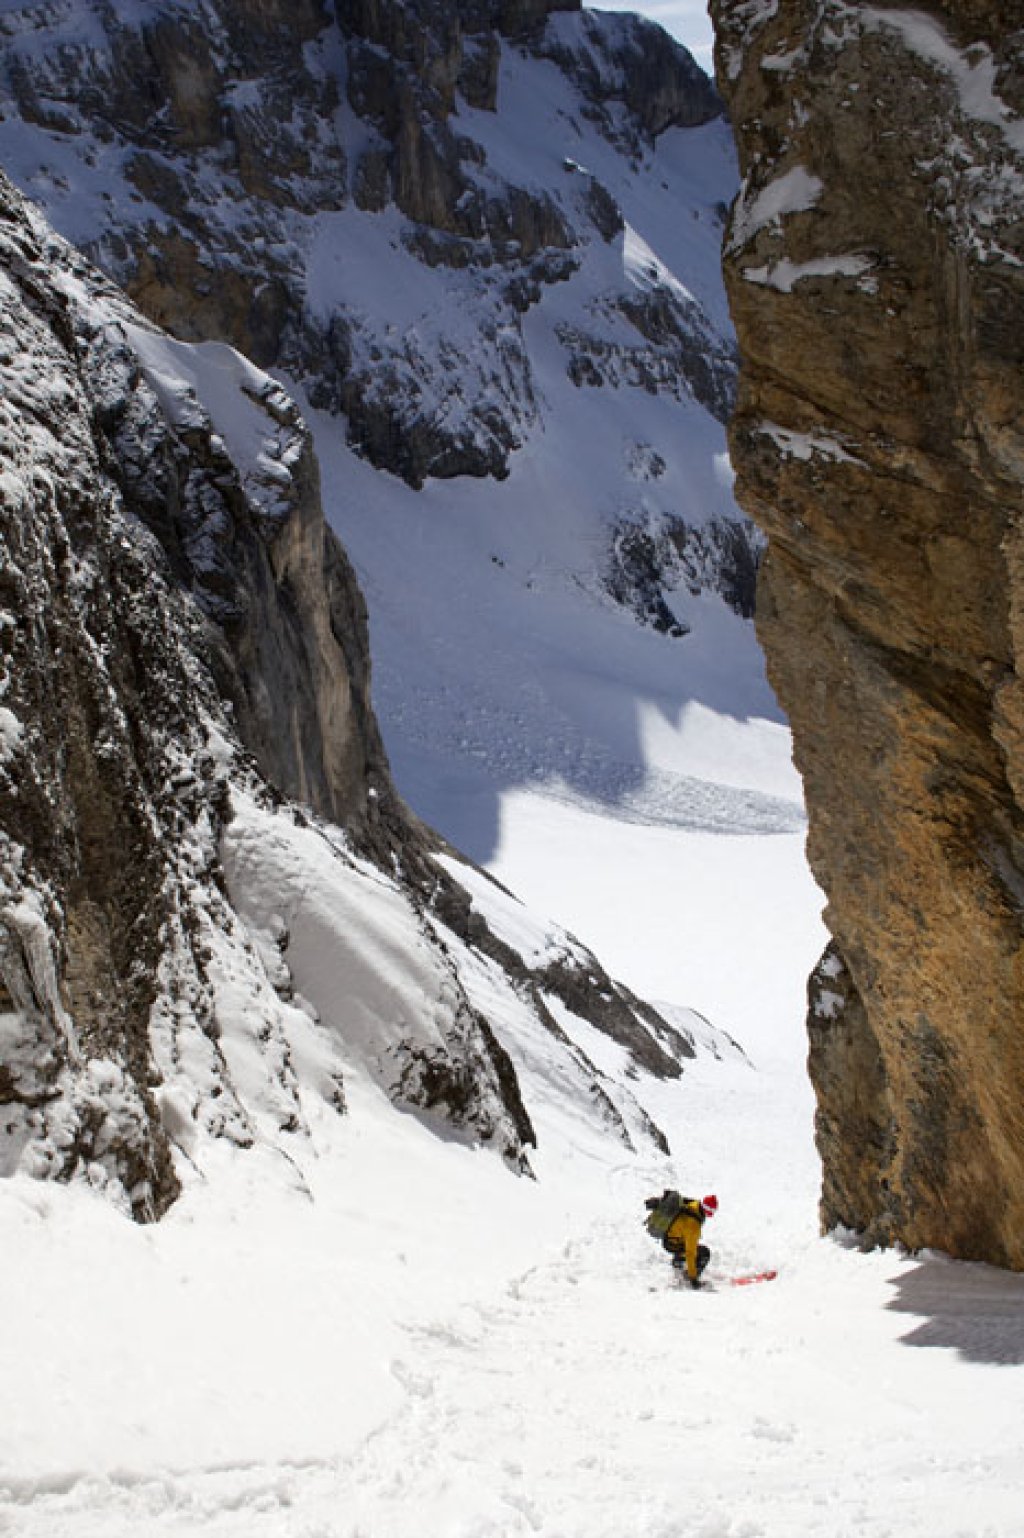 Exit from the first gully on Chli Gletscherli in perfect firn conditions.